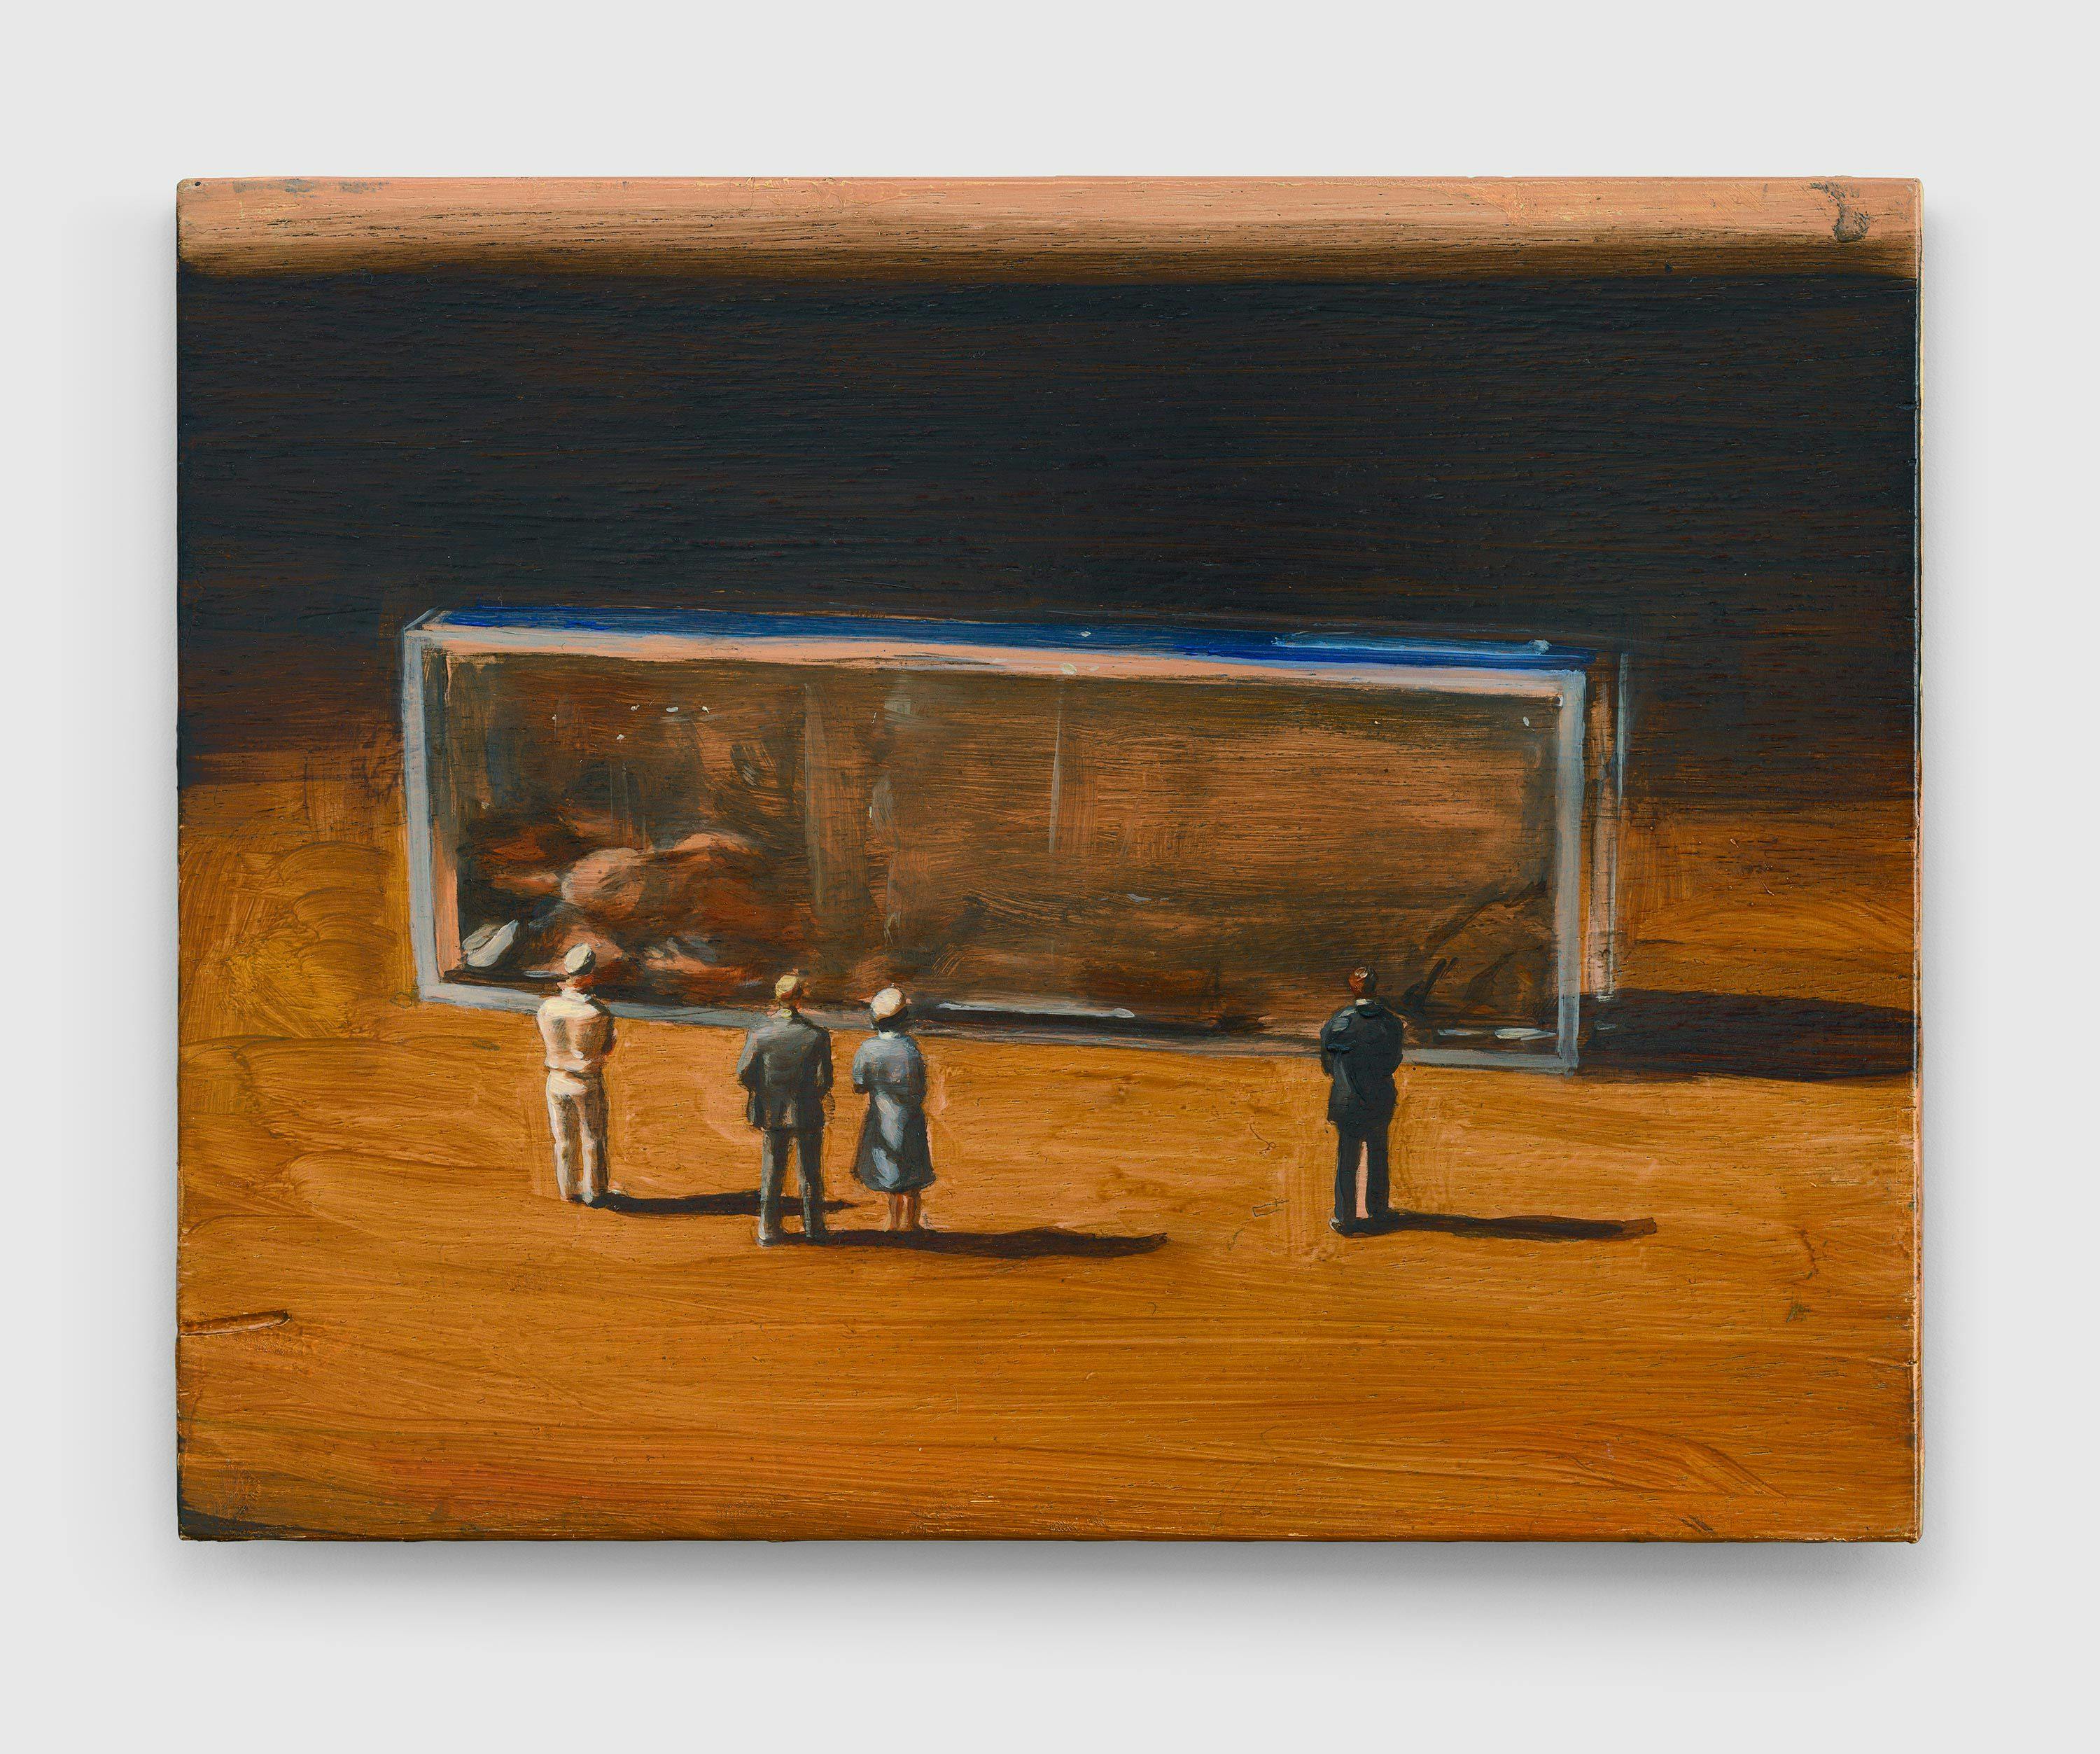 A painting by Michaël Borremans, titled With Animals, dated 2021.